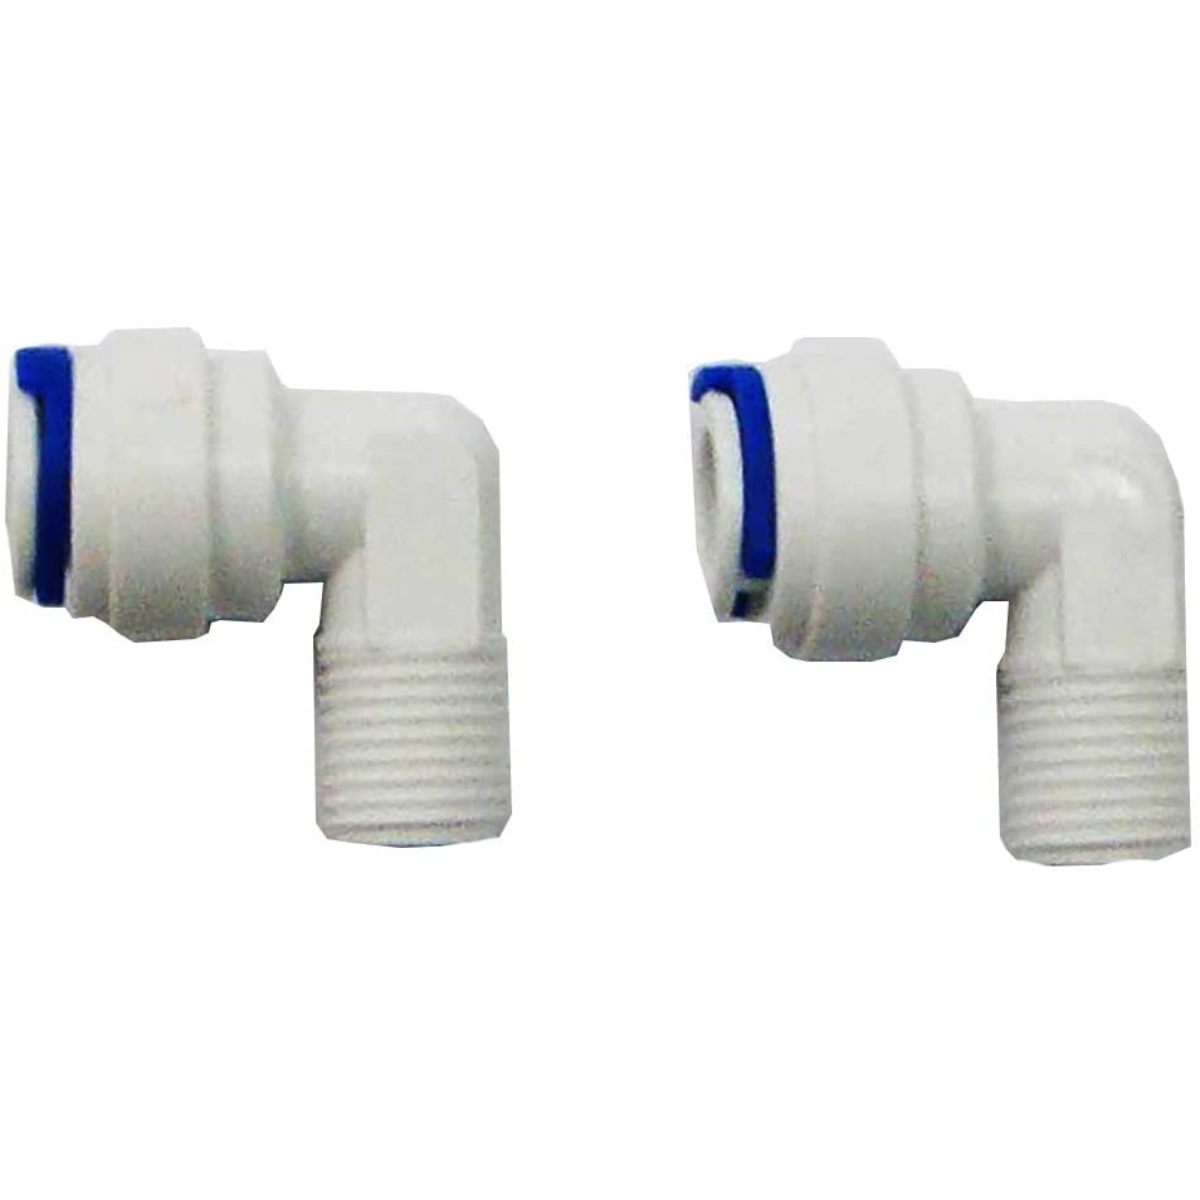 2 elbow quick fitting /connectors for Reverse Osmosis RO,3/8" tube x 1/4" thread 